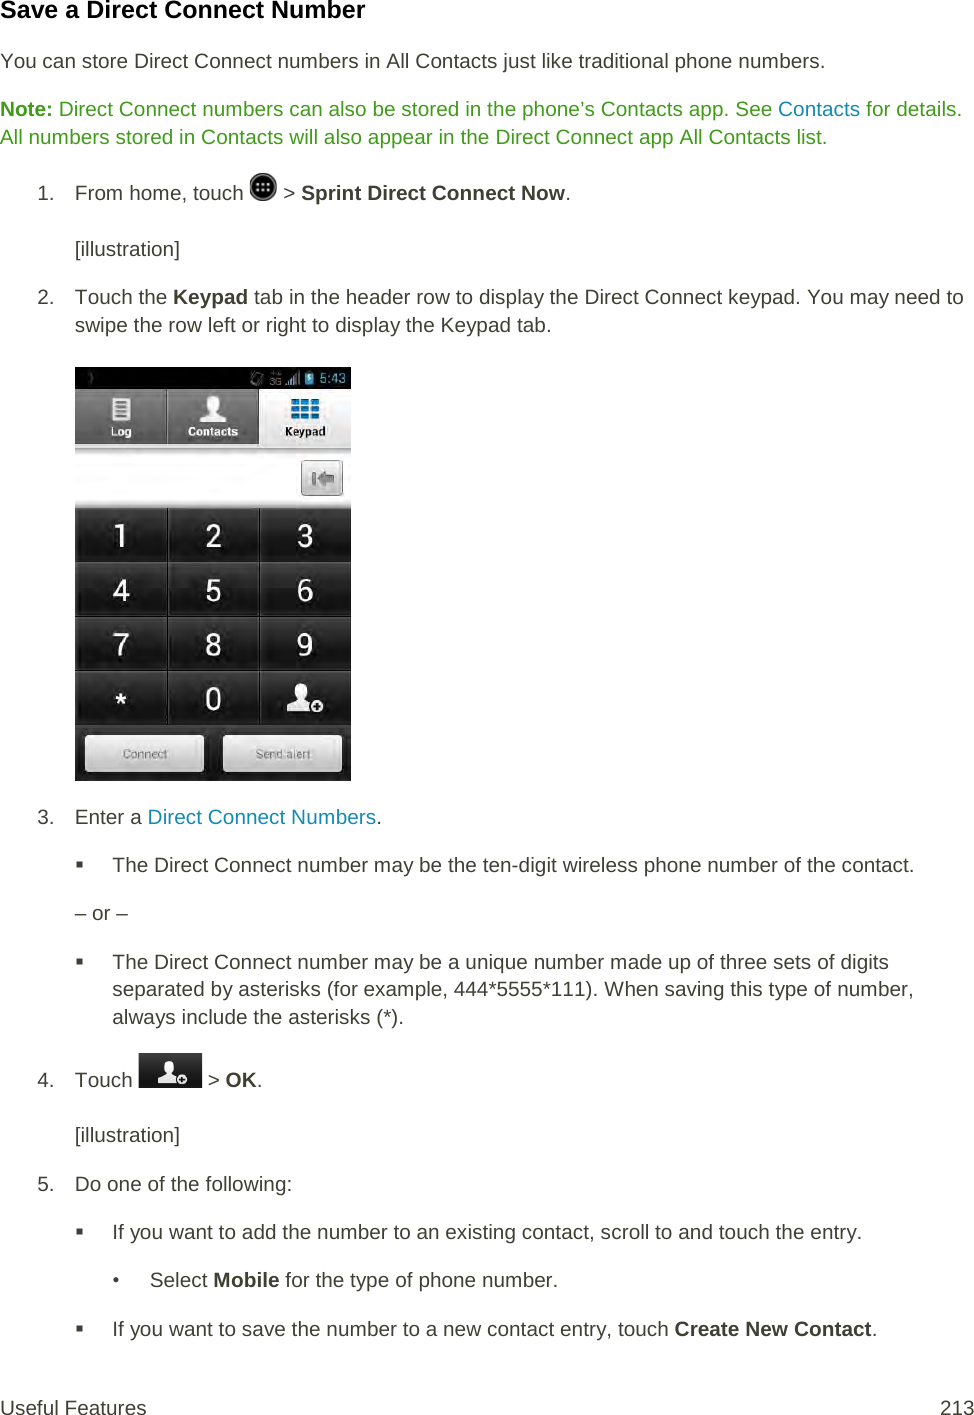 Save a Direct Connect Number You can store Direct Connect numbers in All Contacts just like traditional phone numbers. Note: Direct Connect numbers can also be stored in the phone’s Contacts app. See Contacts for details. All numbers stored in Contacts will also appear in the Direct Connect app All Contacts list. 1.  From home, touch   &gt; Sprint Direct Connect Now.   [illustration] 2. Touch the Keypad tab in the header row to display the Direct Connect keypad. You may need to swipe the row left or right to display the Keypad tab.   3.  Enter a Direct Connect Numbers.  The Direct Connect number may be the ten-digit wireless phone number of the contact. – or –  The Direct Connect number may be a unique number made up of three sets of digits separated by asterisks (for example, 444*5555*111). When saving this type of number, always include the asterisks (*). 4. Touch   &gt; OK.   [illustration] 5. Do one of the following:  If you want to add the number to an existing contact, scroll to and touch the entry.  • Select Mobile for the type of phone number.  If you want to save the number to a new contact entry, touch Create New Contact.  Useful Features 213   